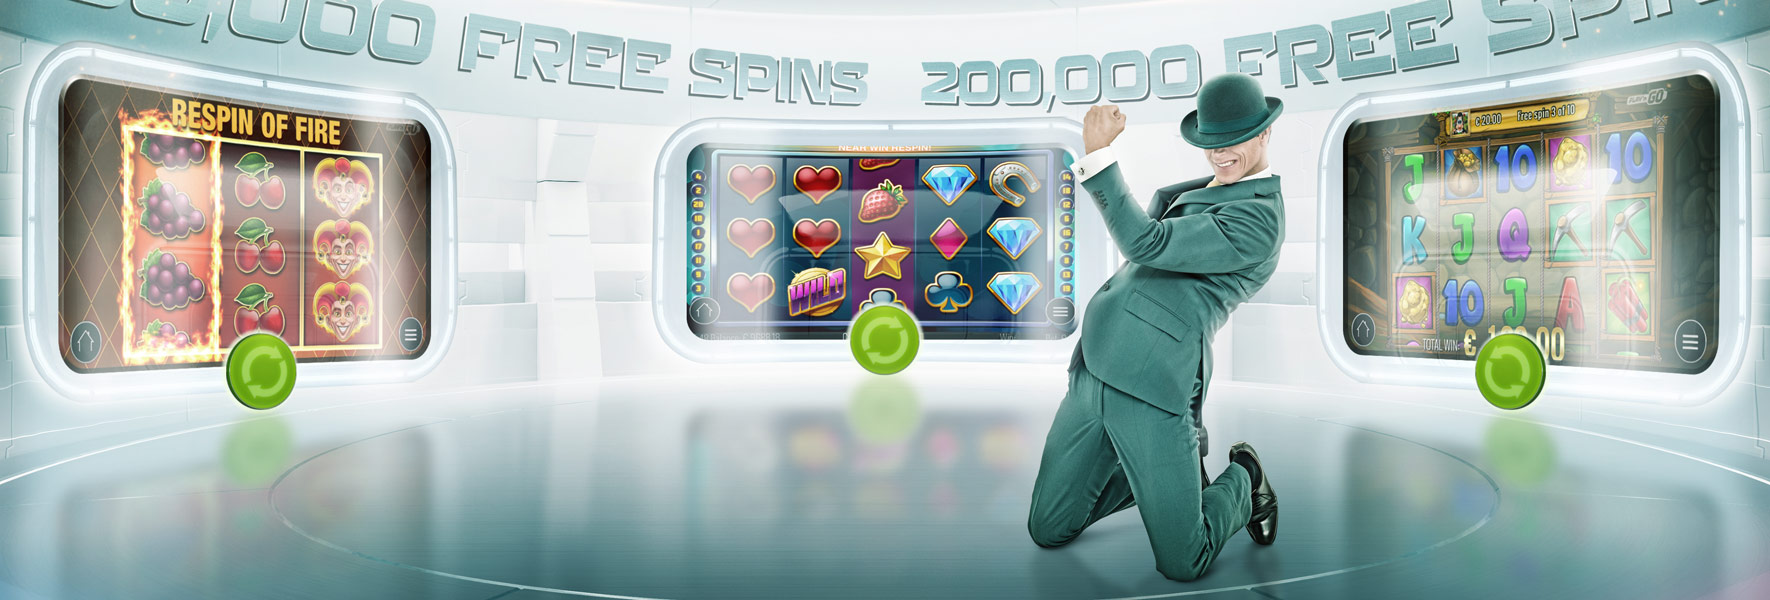 200000-Free-Spins-Festival